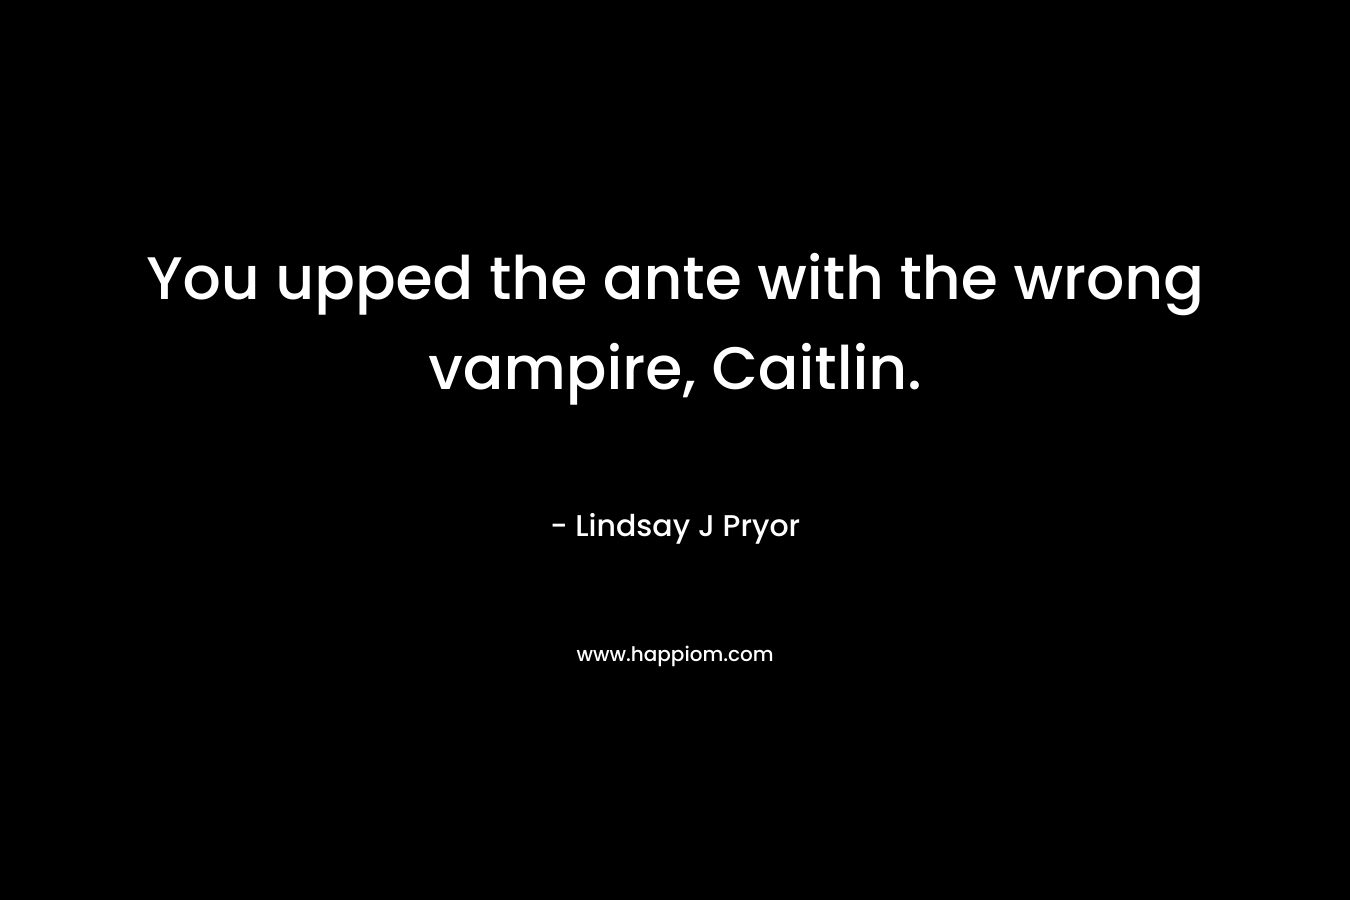 You upped the ante with the wrong vampire, Caitlin. – Lindsay J Pryor